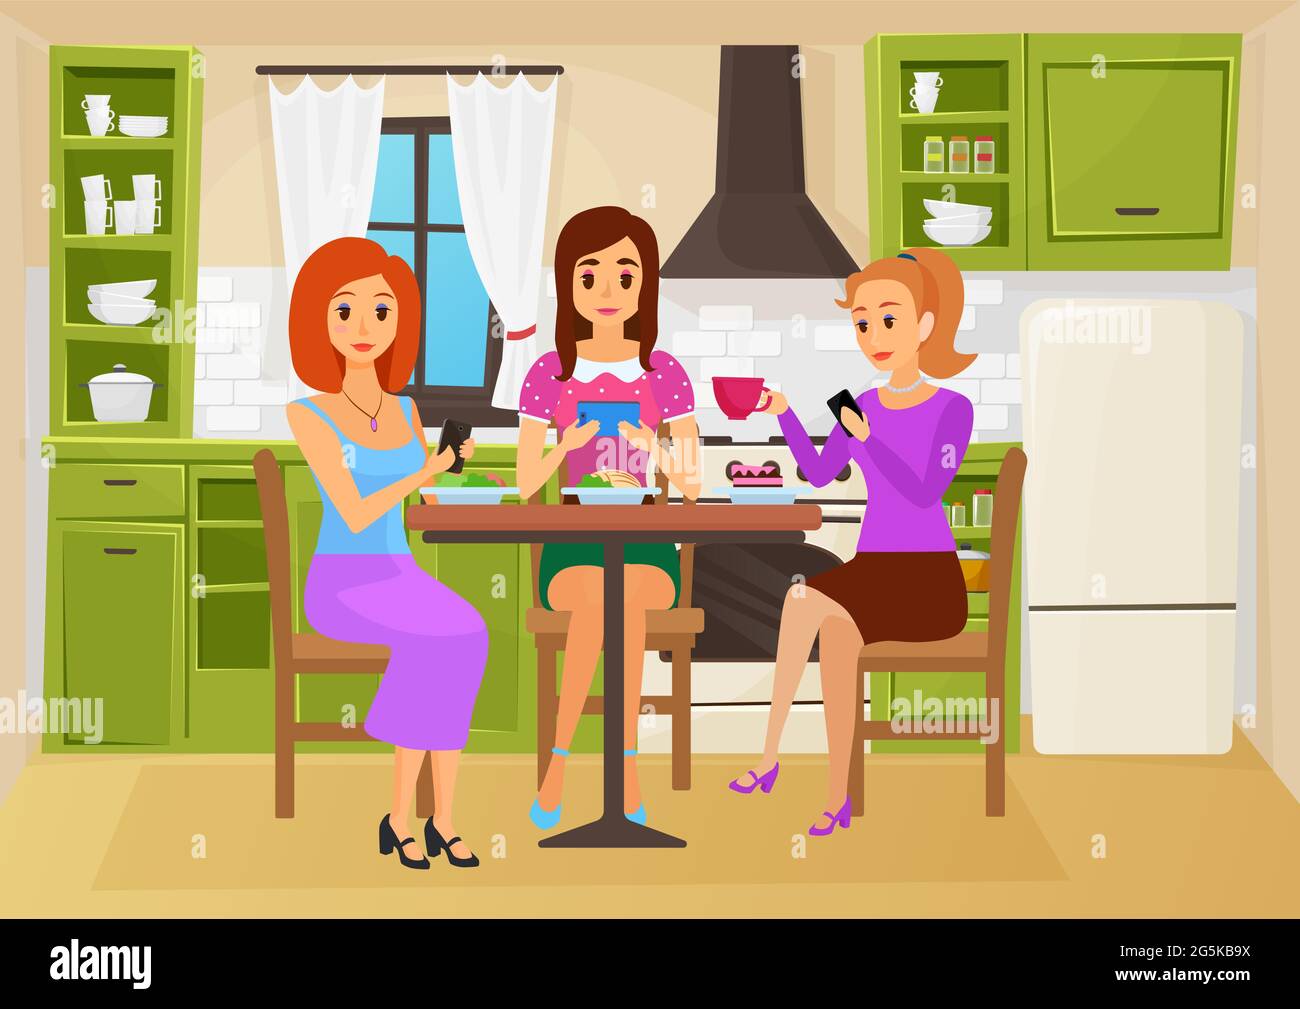 https://c8.alamy.com/comp/2G5KB9X/people-friends-eat-food-in-cute-kitchen-together-vector-illustration-cartoon-friendly-meeting-of-hungry-girl-characters-sitting-at-kitchen-table-and-talking-eating-meal-female-friendship-background-2G5KB9X.jpg